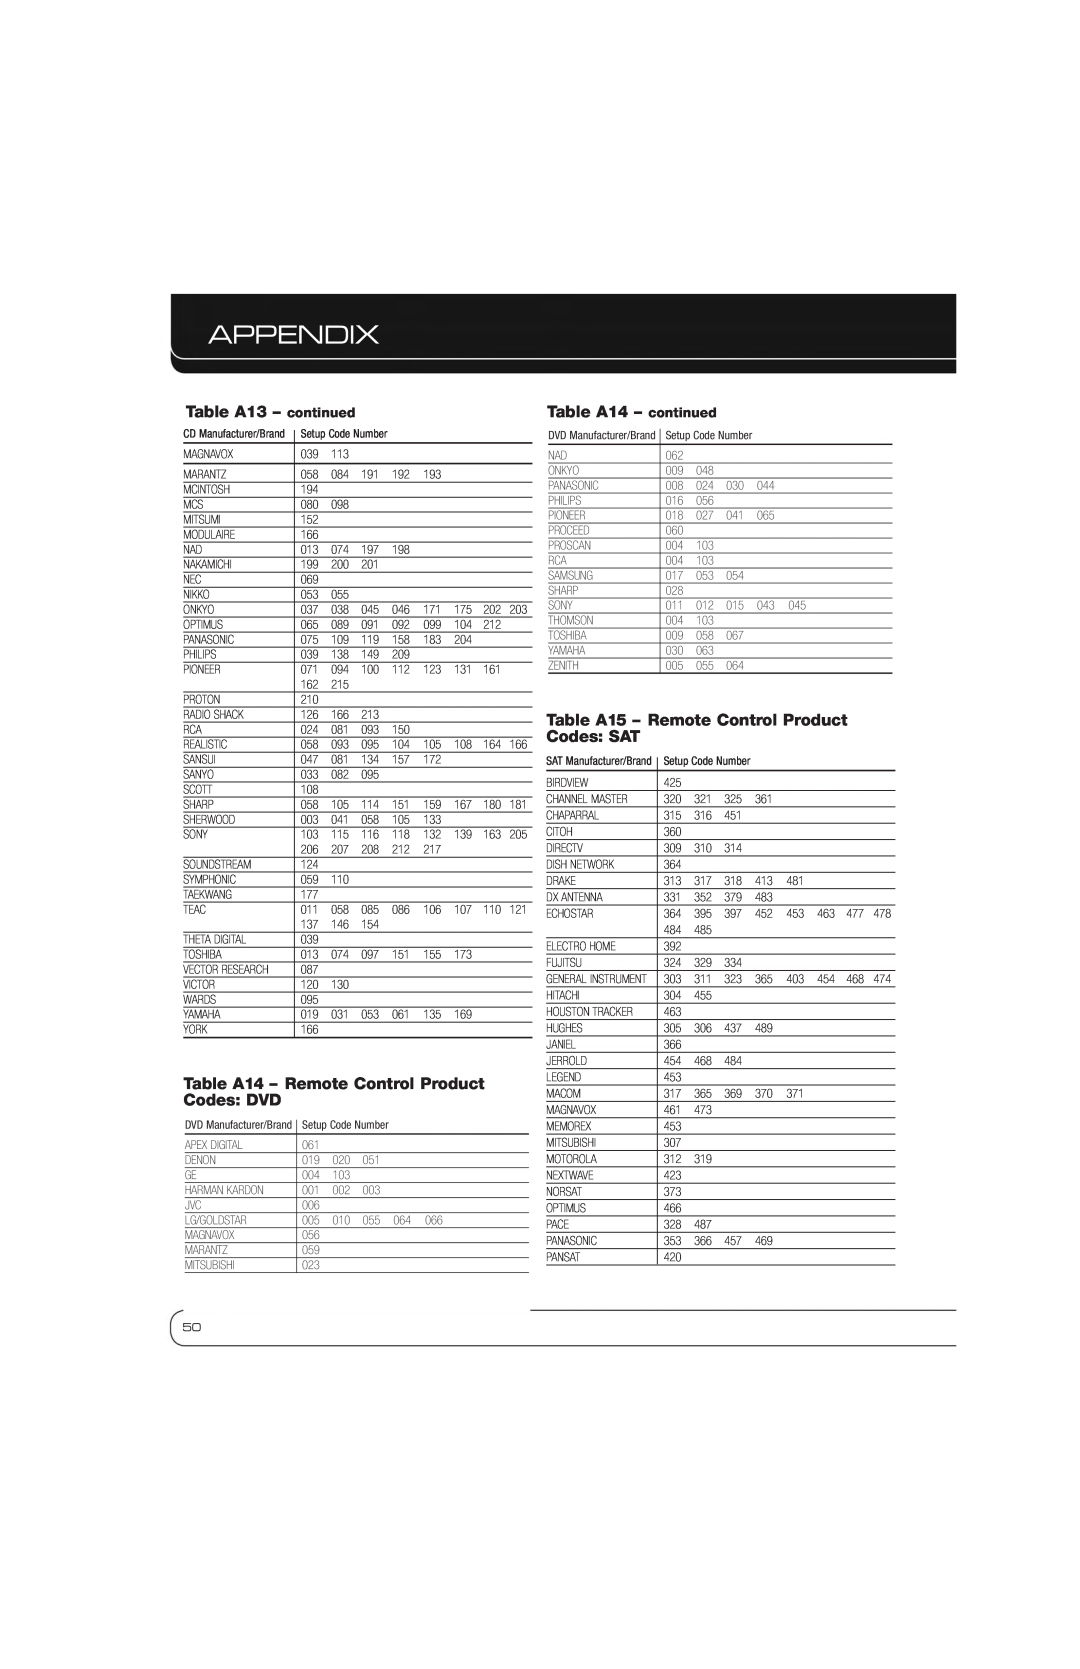 Harman-Kardon AVR 1600 Table A13 - continued, Table A14 - Remote Control Product Codes DVD, Table A14 - continued 